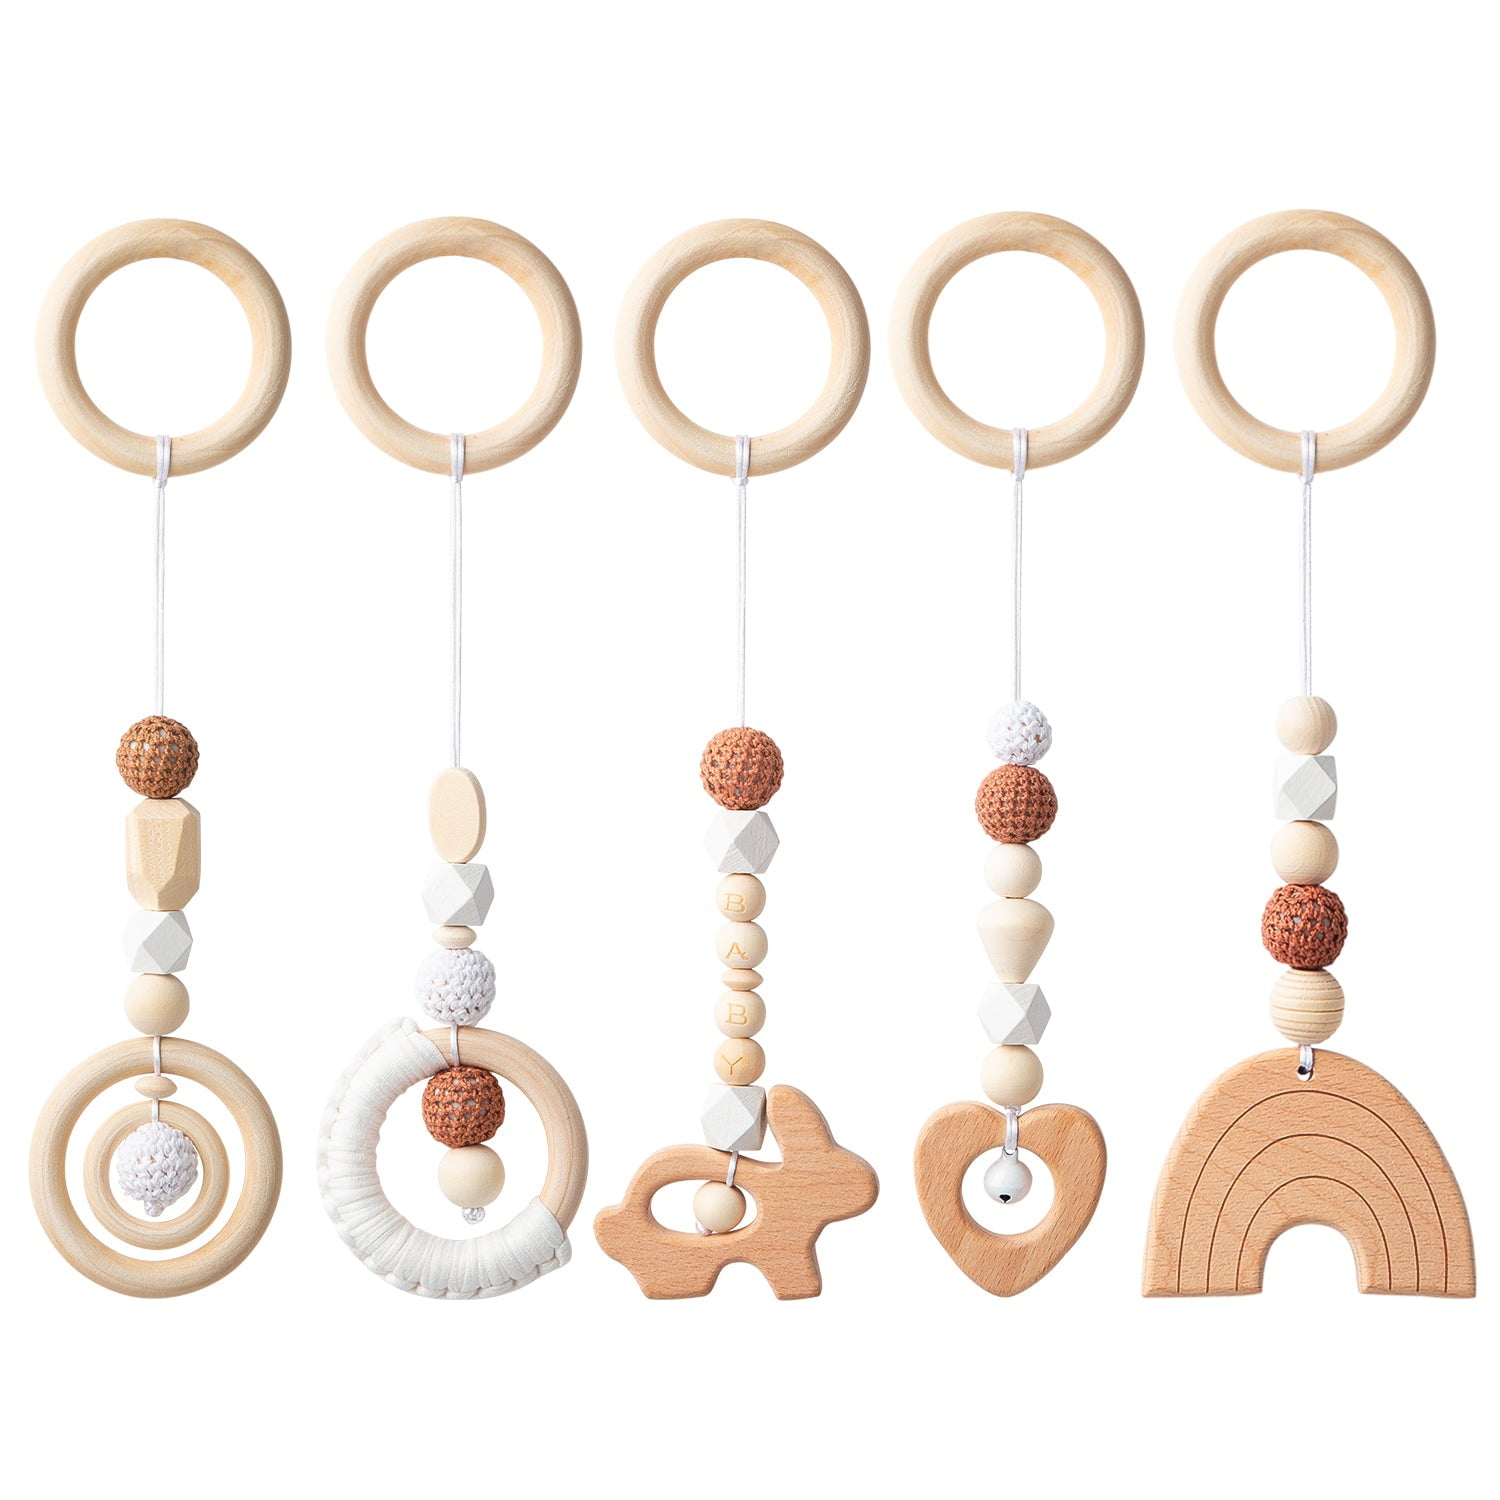 Infant Wooden Activity Play Gym Hanging Toy Animal Teether Baby Pram Sensory Toy 